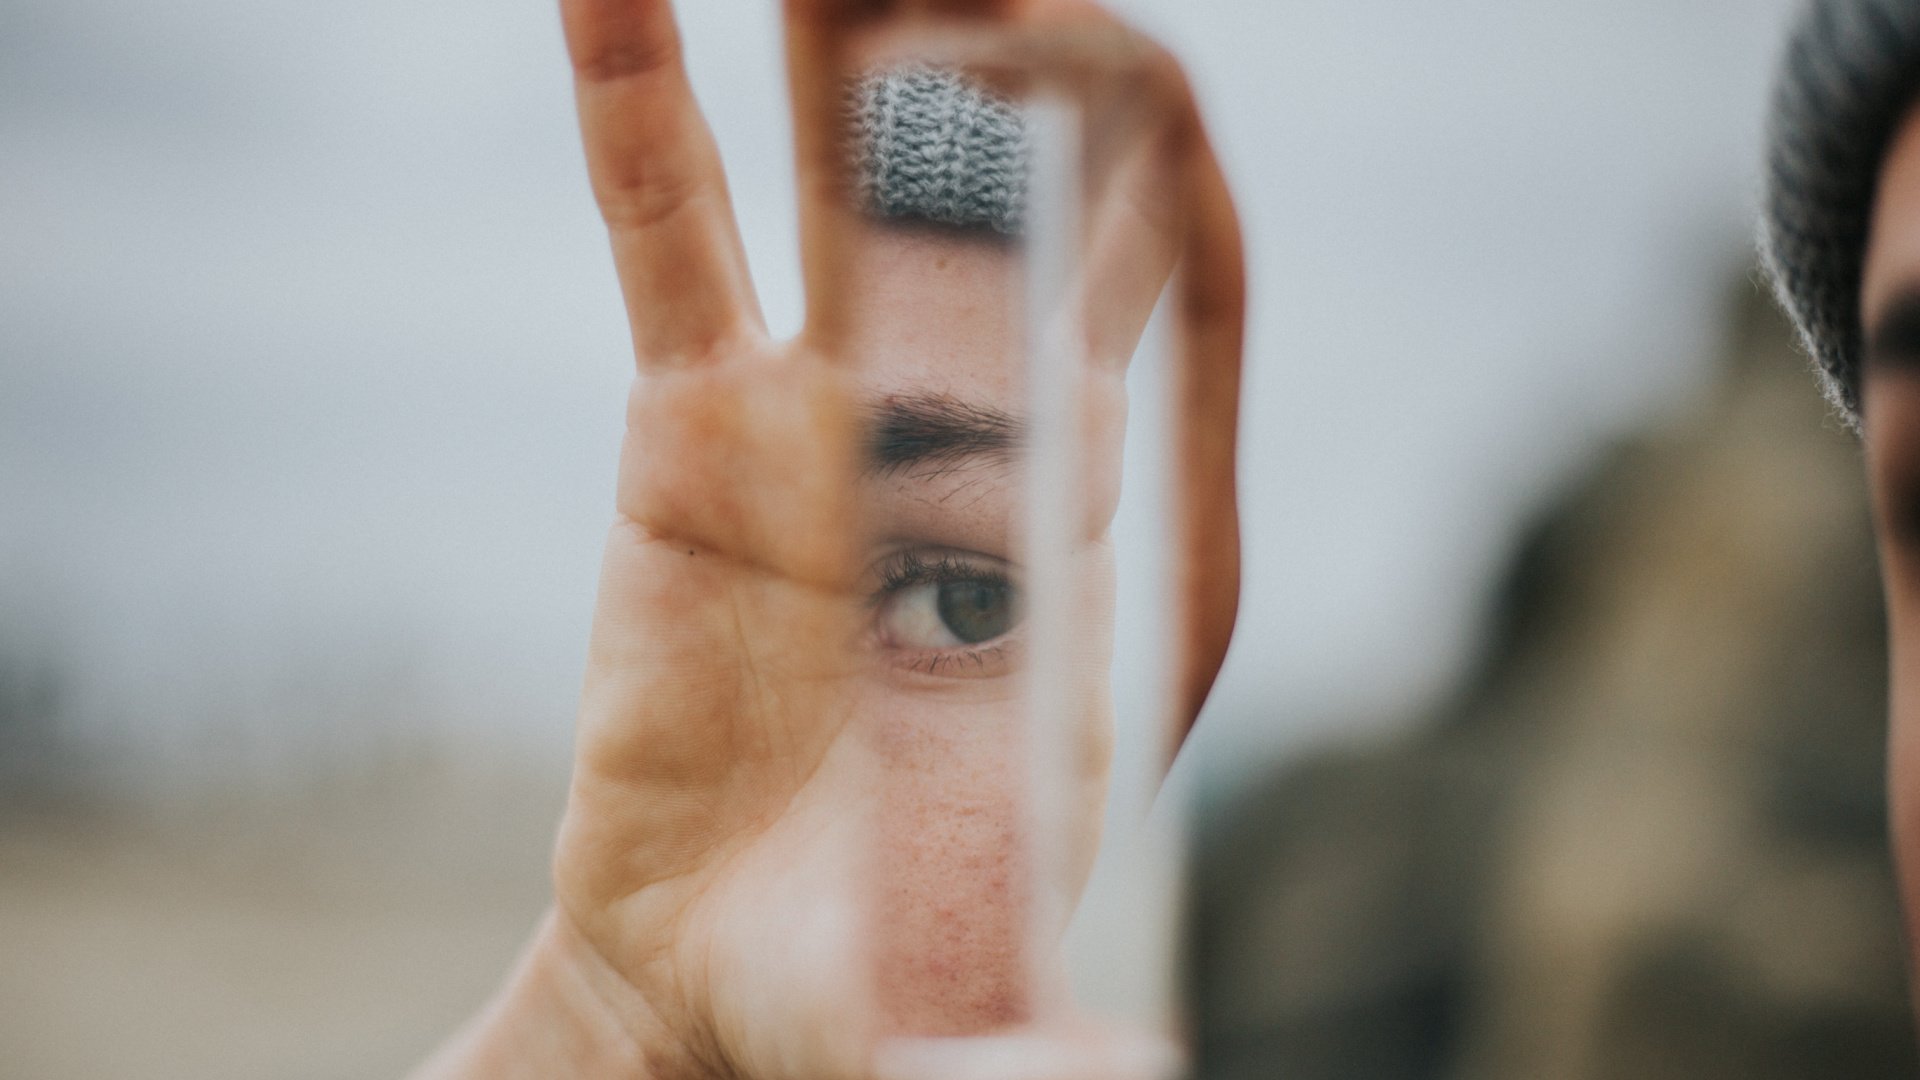 A hand holding a mirror reflecting the person's hand and eye 